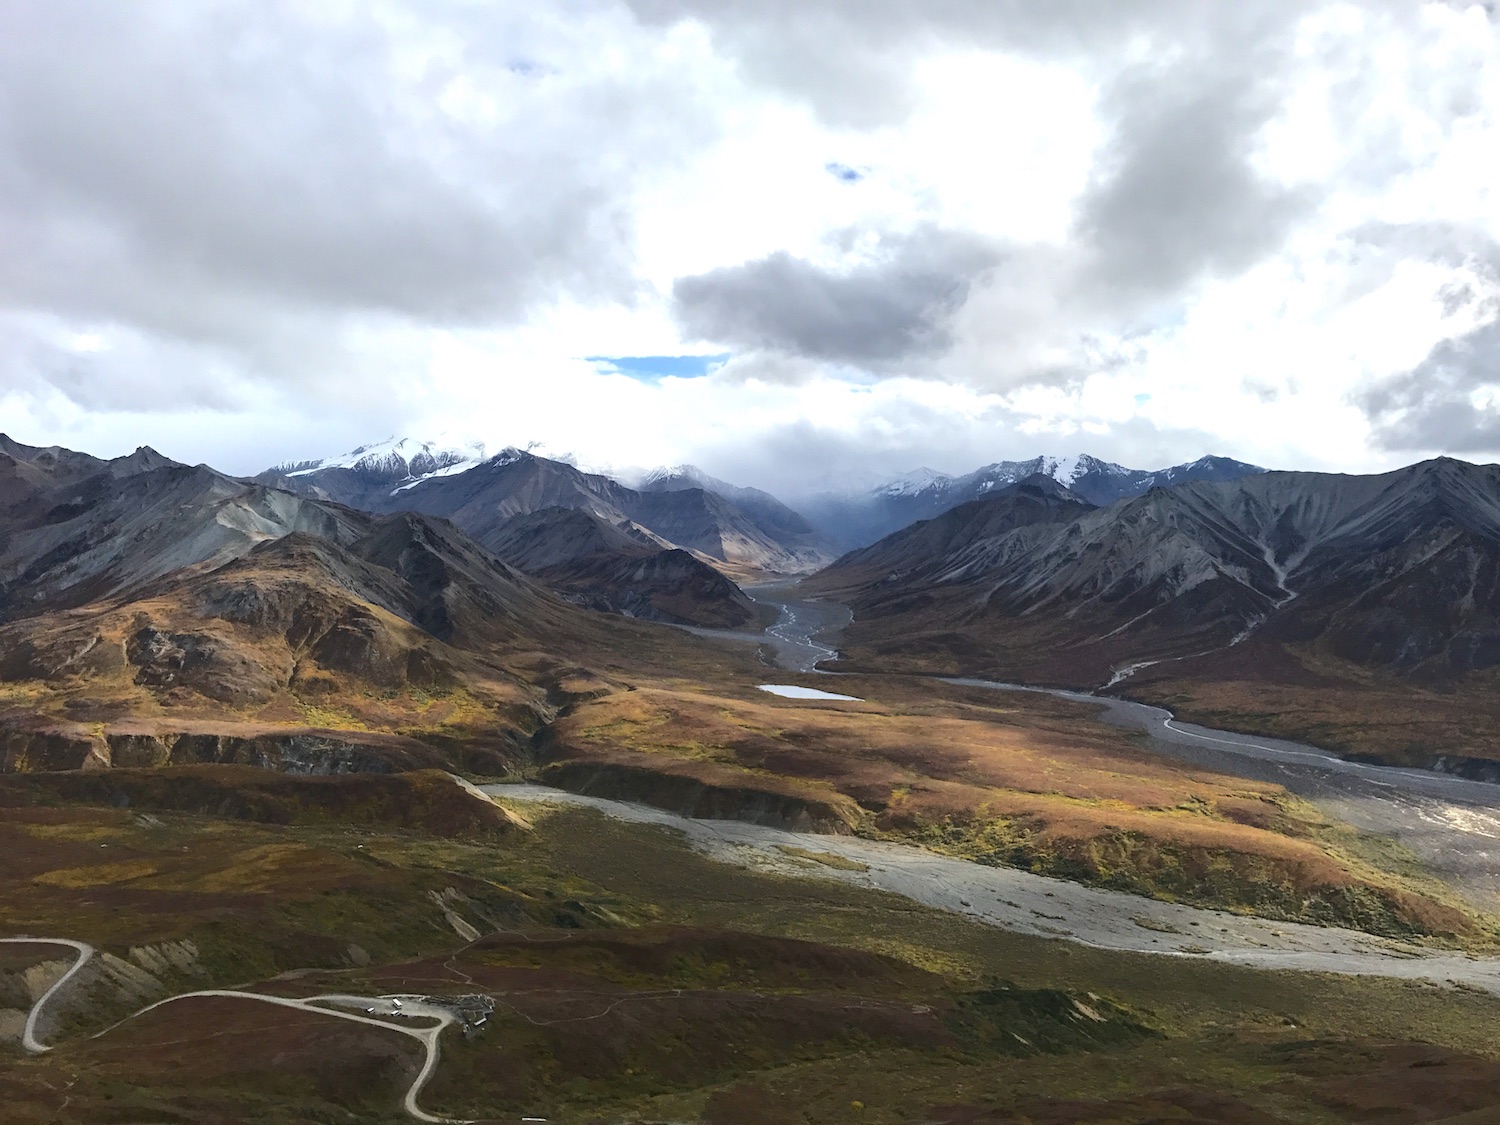 View from the top of the Alpine Trail, Denali National Park